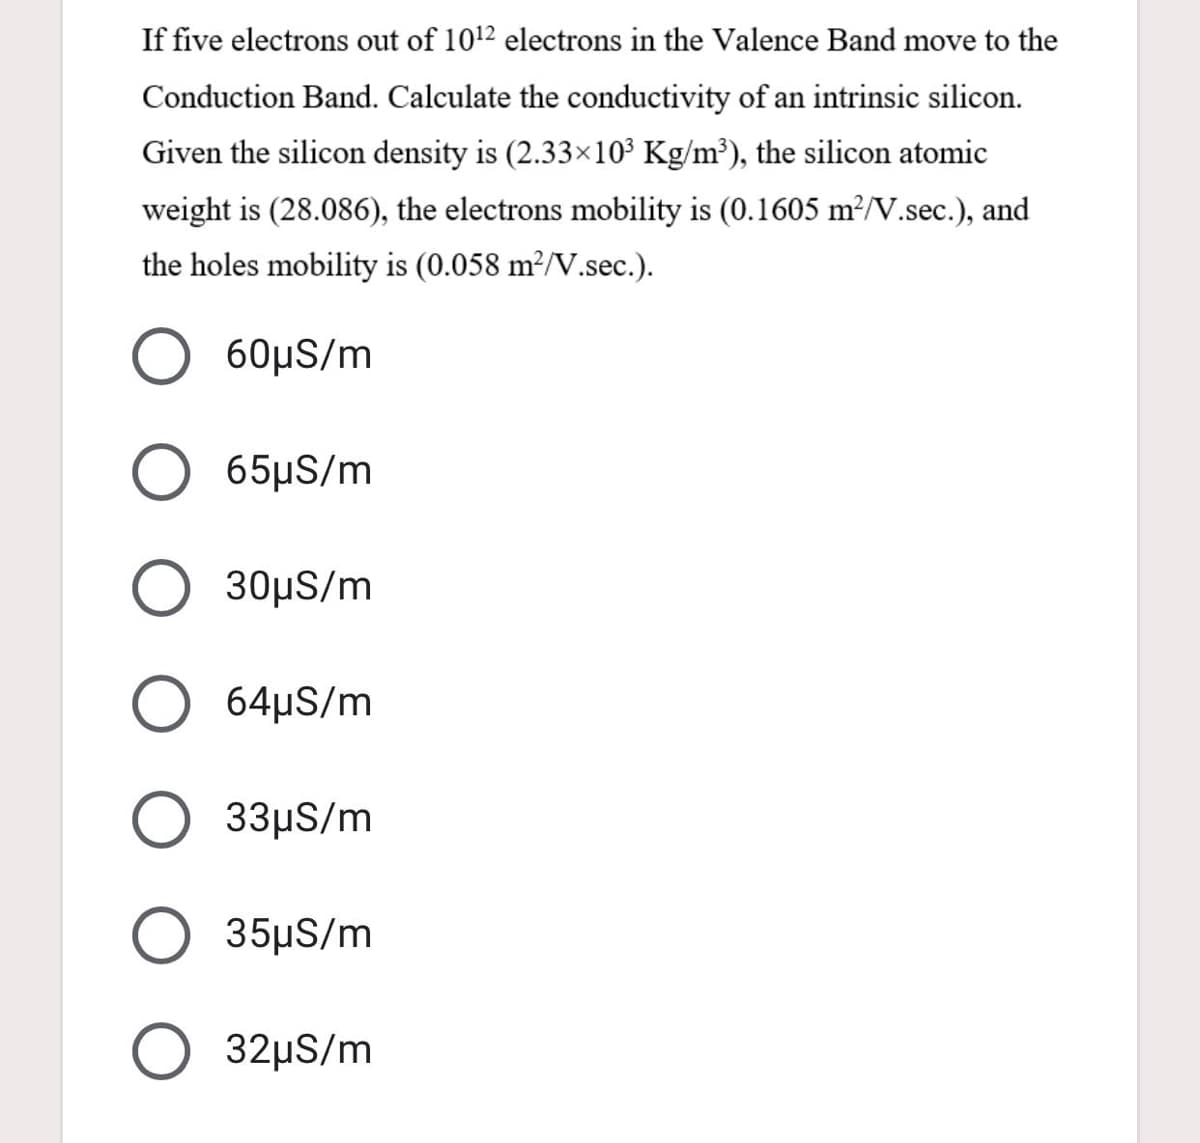 If five electrons out of 1012 electrons in the Valence Band move to the
Conduction Band. Calculate the conductivity of an intrinsic silicon.
Given the silicon density is (2.33×10³ Kg/m³), the silicon atomic
weight is (28.086), the electrons mobility is (0.1605 m²N.sec.), and
the holes mobility is (0.058 m²/V.sec.).
60μS/m
65μS/m
30μS/m
64µS/m
33μS/m
35μS/m
32µS/m
